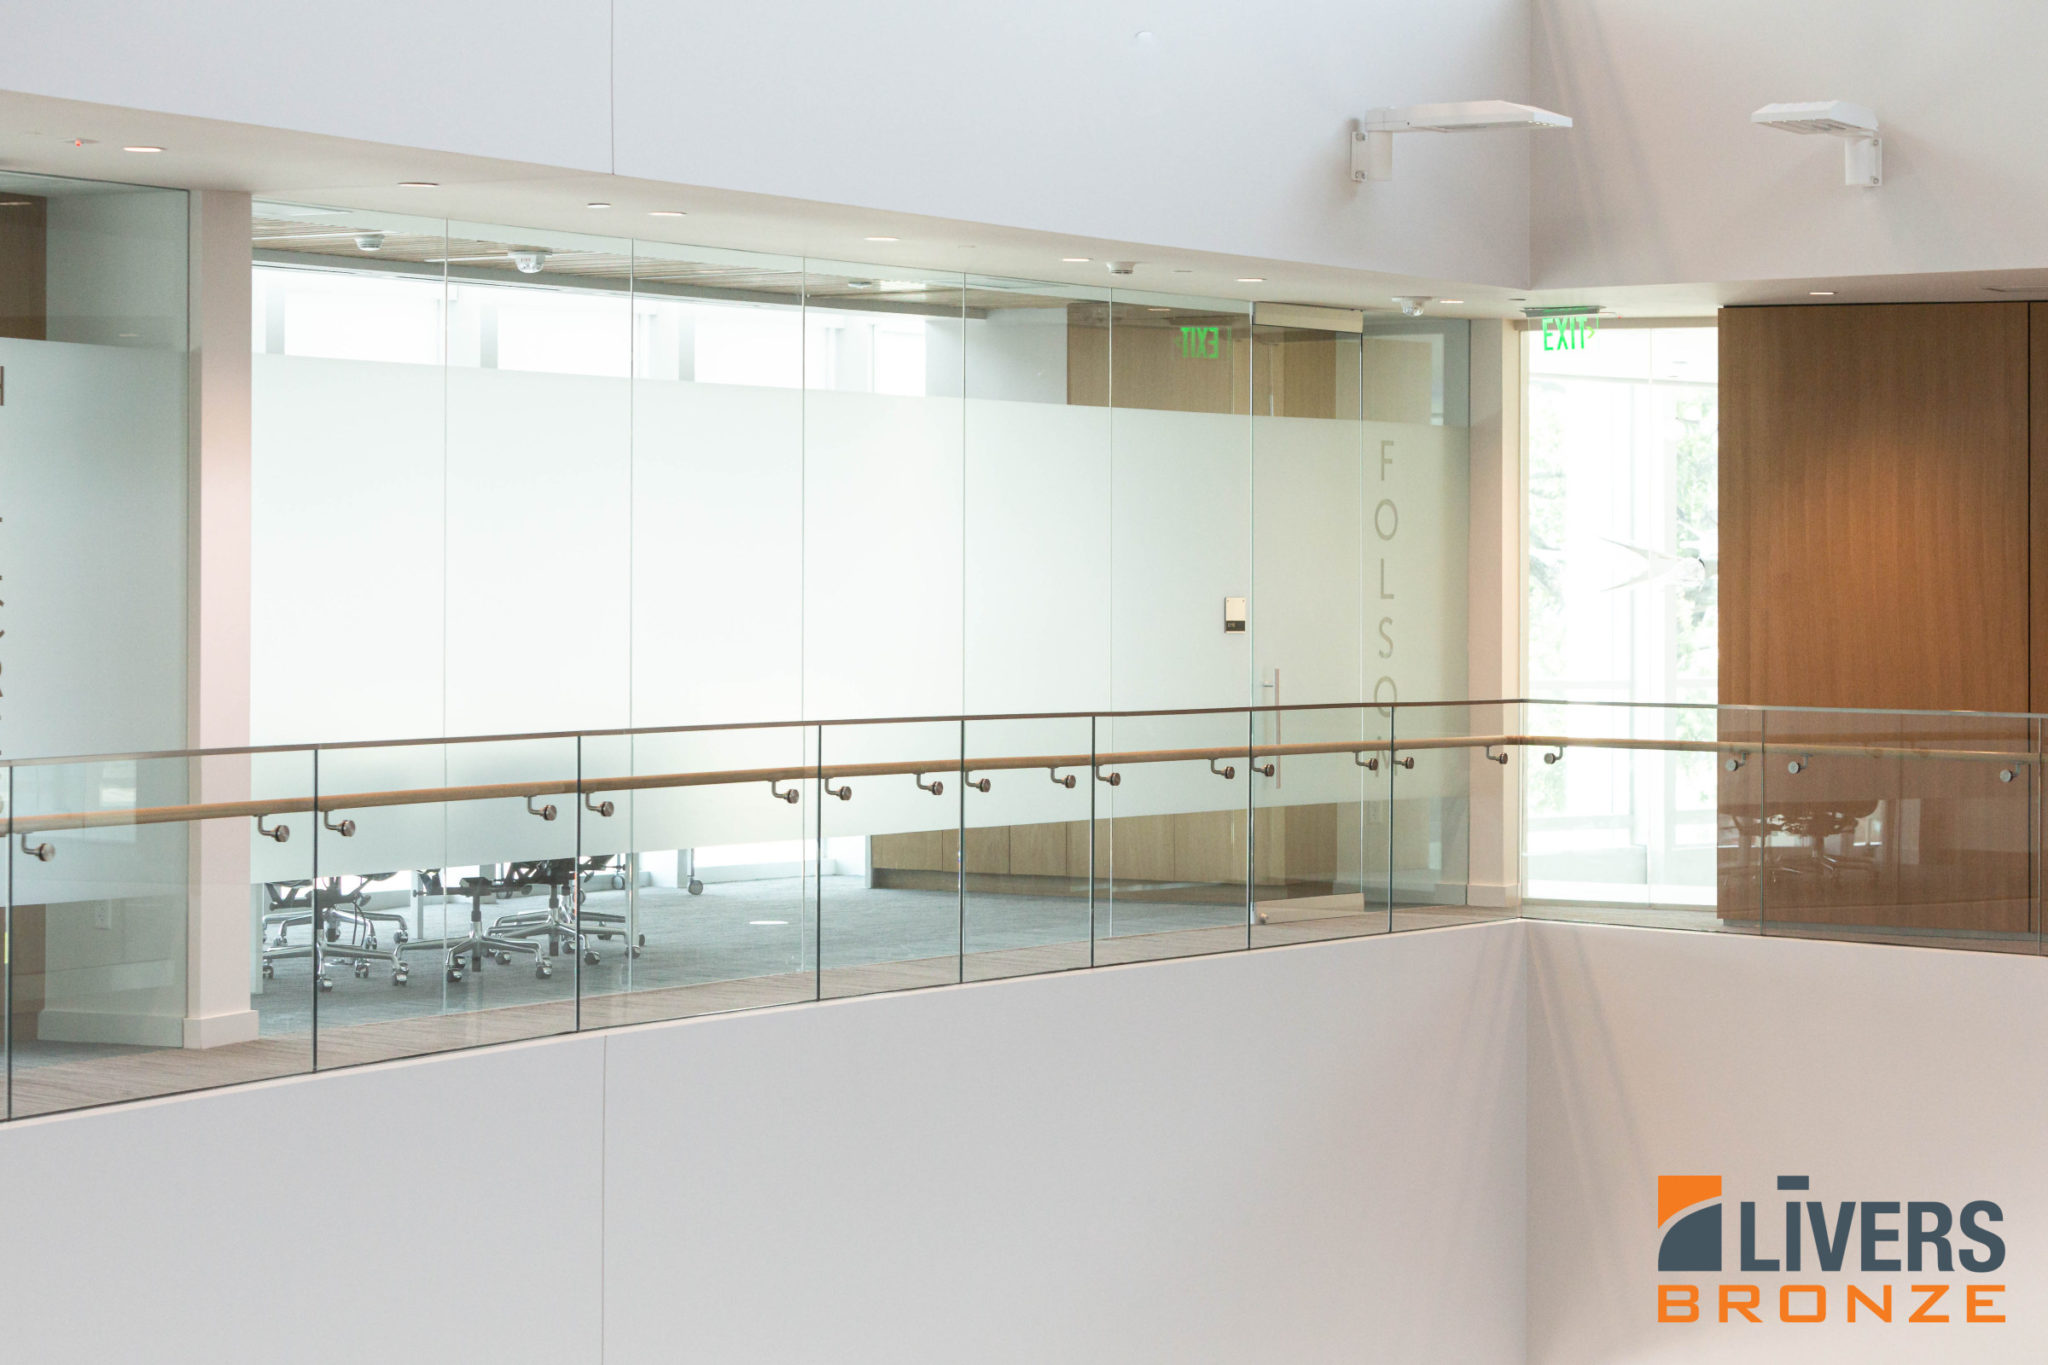 Livers Bronze Struct-U-Rail Commercial Glass Railing was installed at the University of Texas Center for Brain Health in Dallas and was Made in the USA